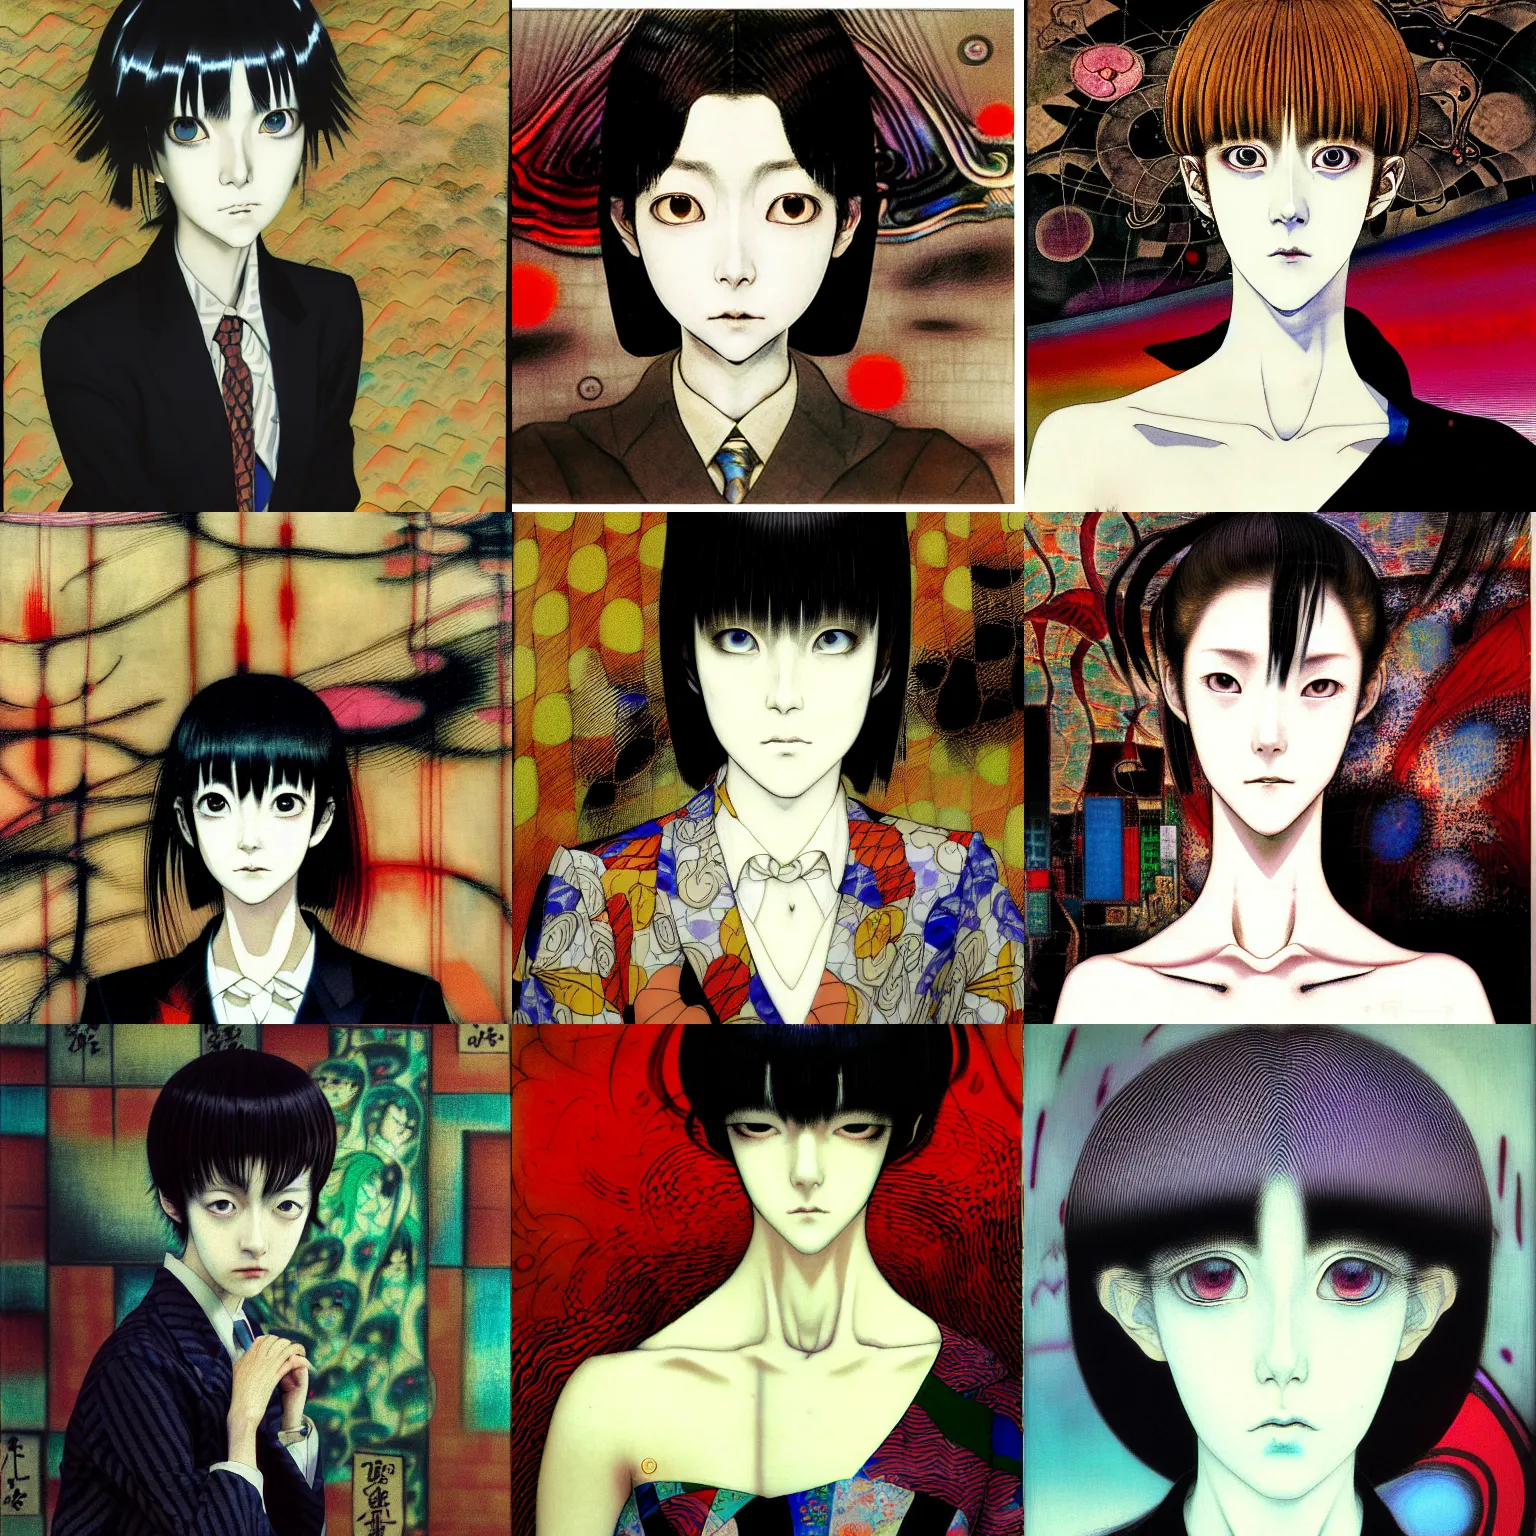 Prompt: yoshitaka amano blurred and dreamy realistic three quarter angle portrait of a young woman with short hair and black eyes wearing dress suit with tie, junji ito abstract patterns in the background, satoshi kon anime, noisy film grain effect, highly detailed, renaissance oil painting, weird portrait angle, 1 9 9 0 s anime